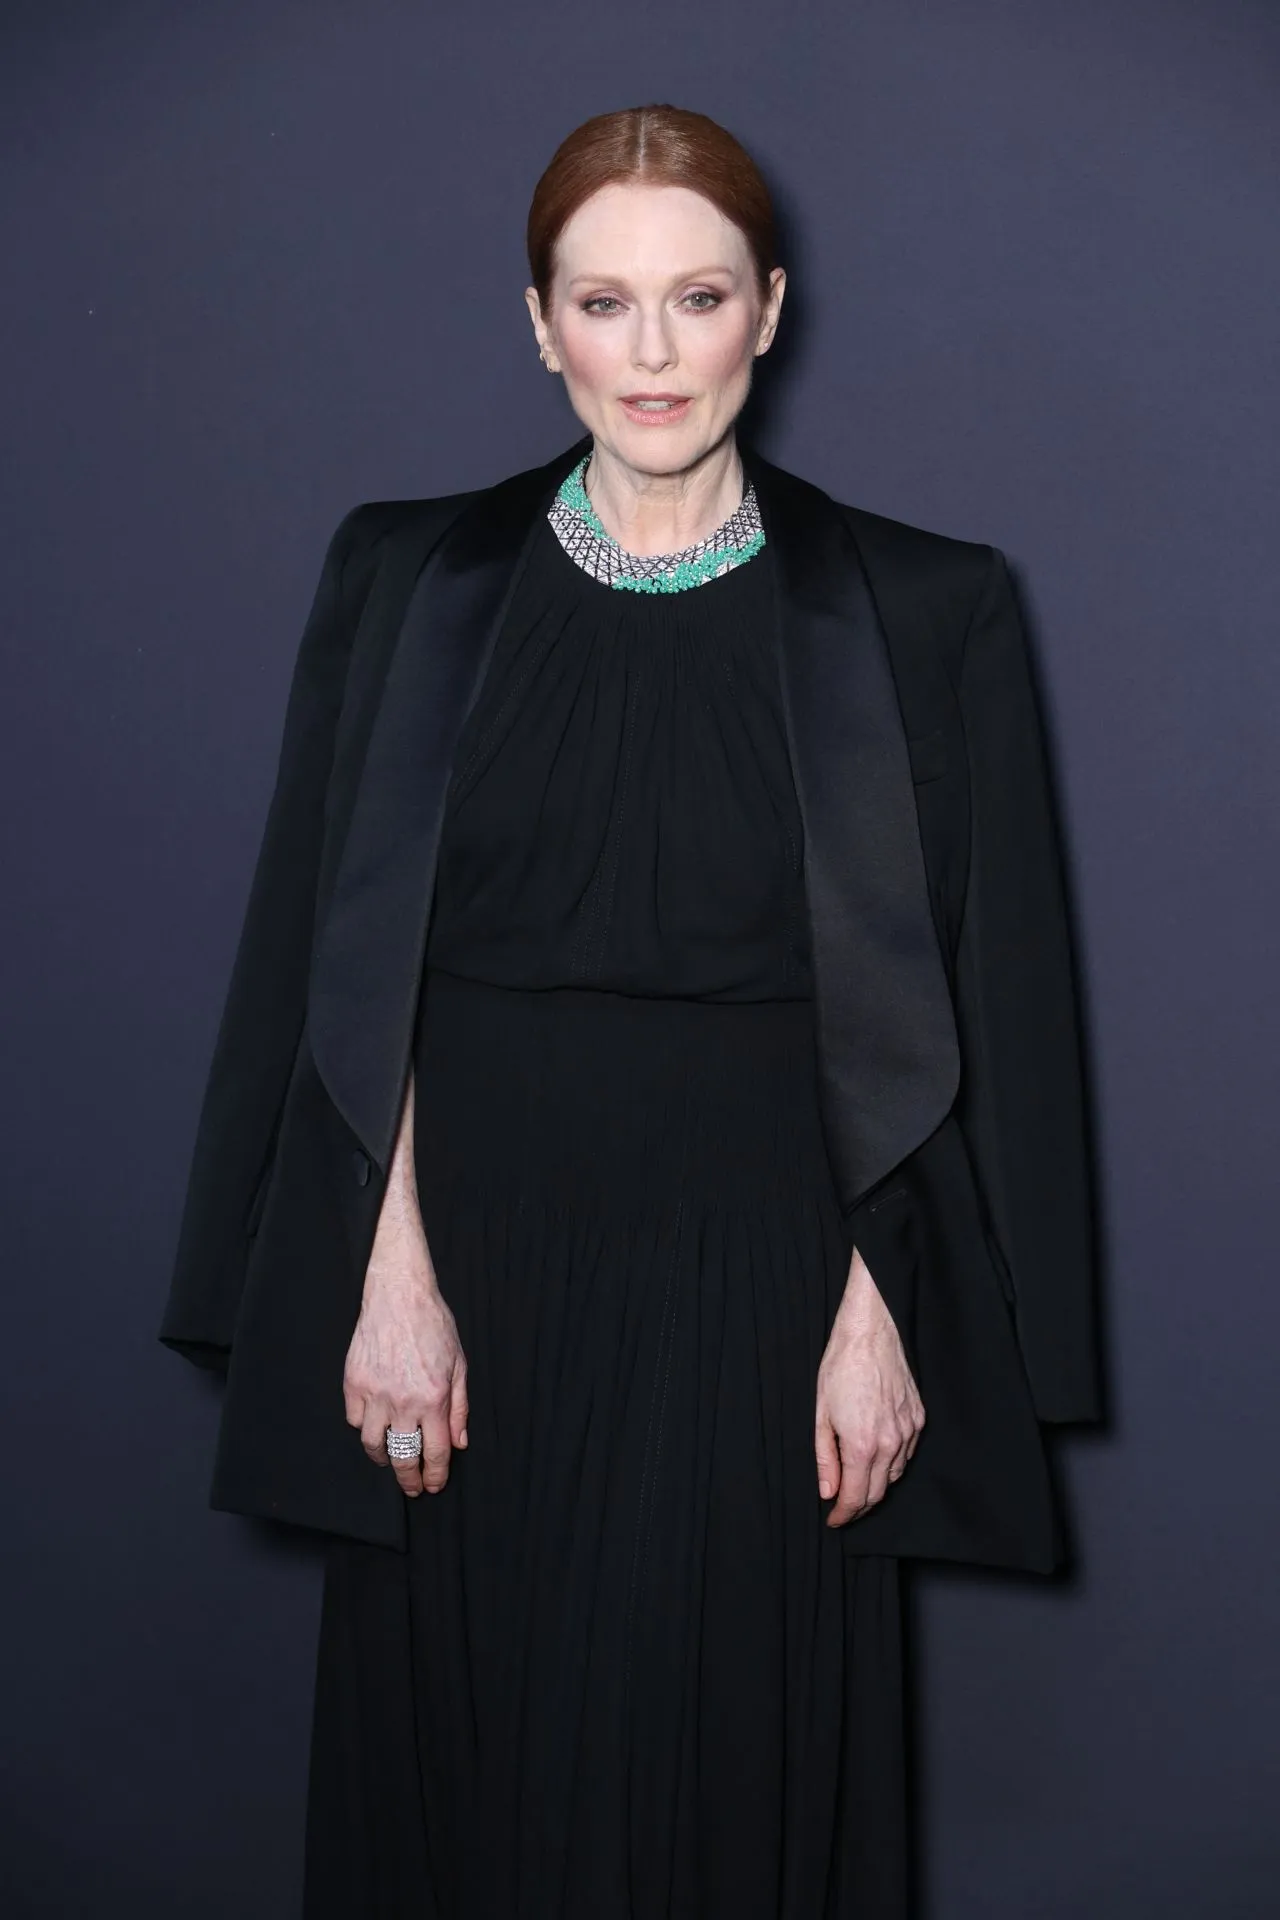 JULIANNE MOORE AT KERING WOMEN IN MOTION AWARDS AT CANNES FILM FESTIVAL7